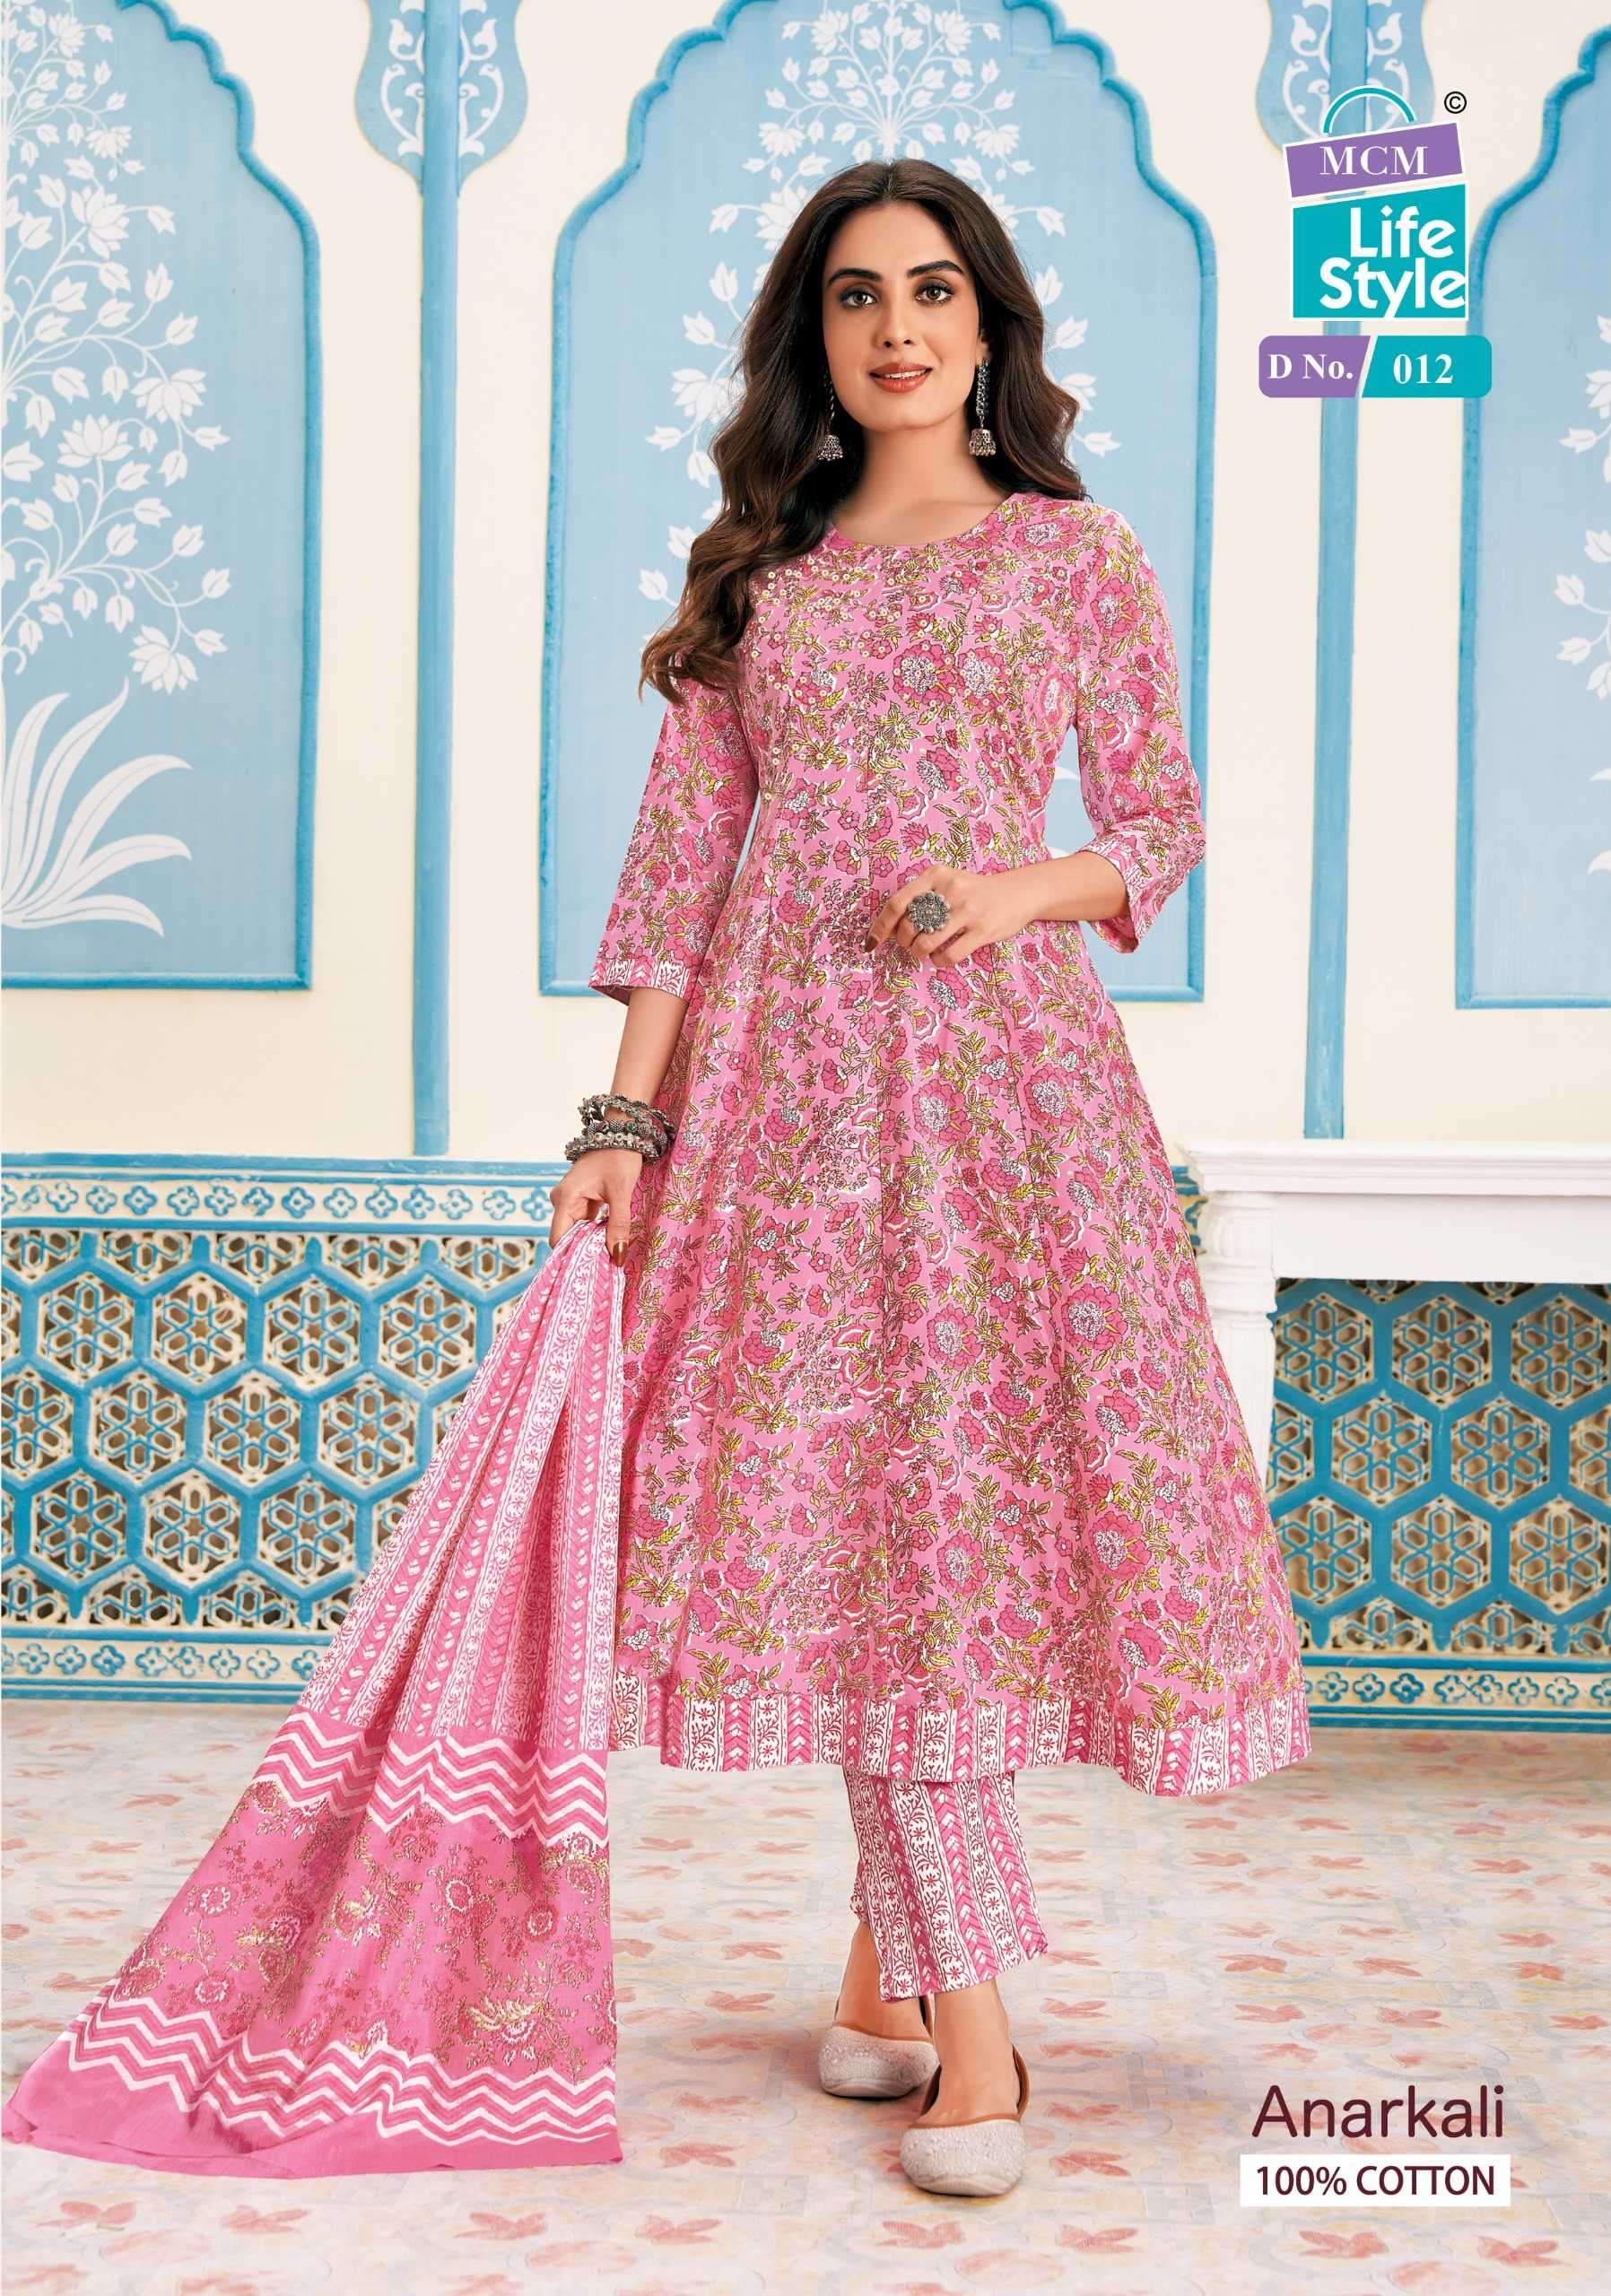 ANARKALI SERIES 009 TO 014 BY MCM DESIGNER PRINTED COTTON ANARKALI KURTI WITH BOTTOM AND DUPATTA ARE AVAILABLE AT WHOLESALE PRICE